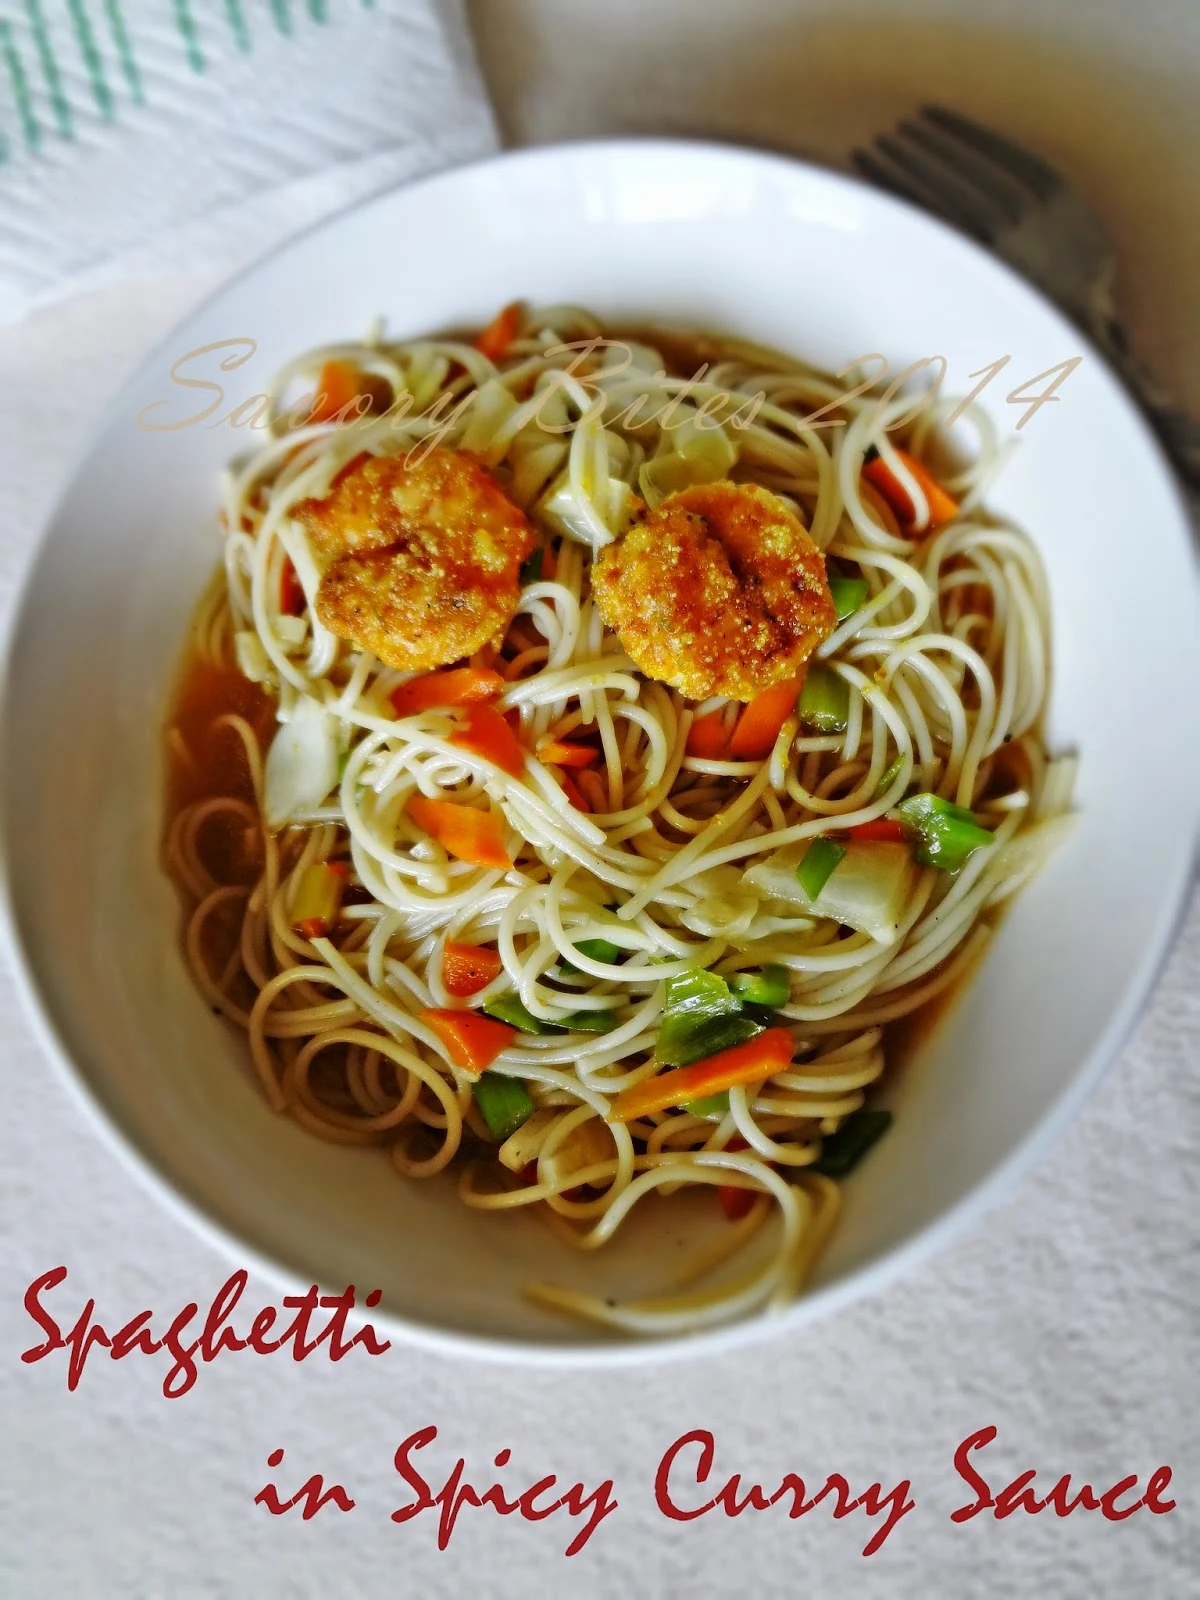 Spaghetti with spicy curry sauce with Italin spiced Prawns Fry